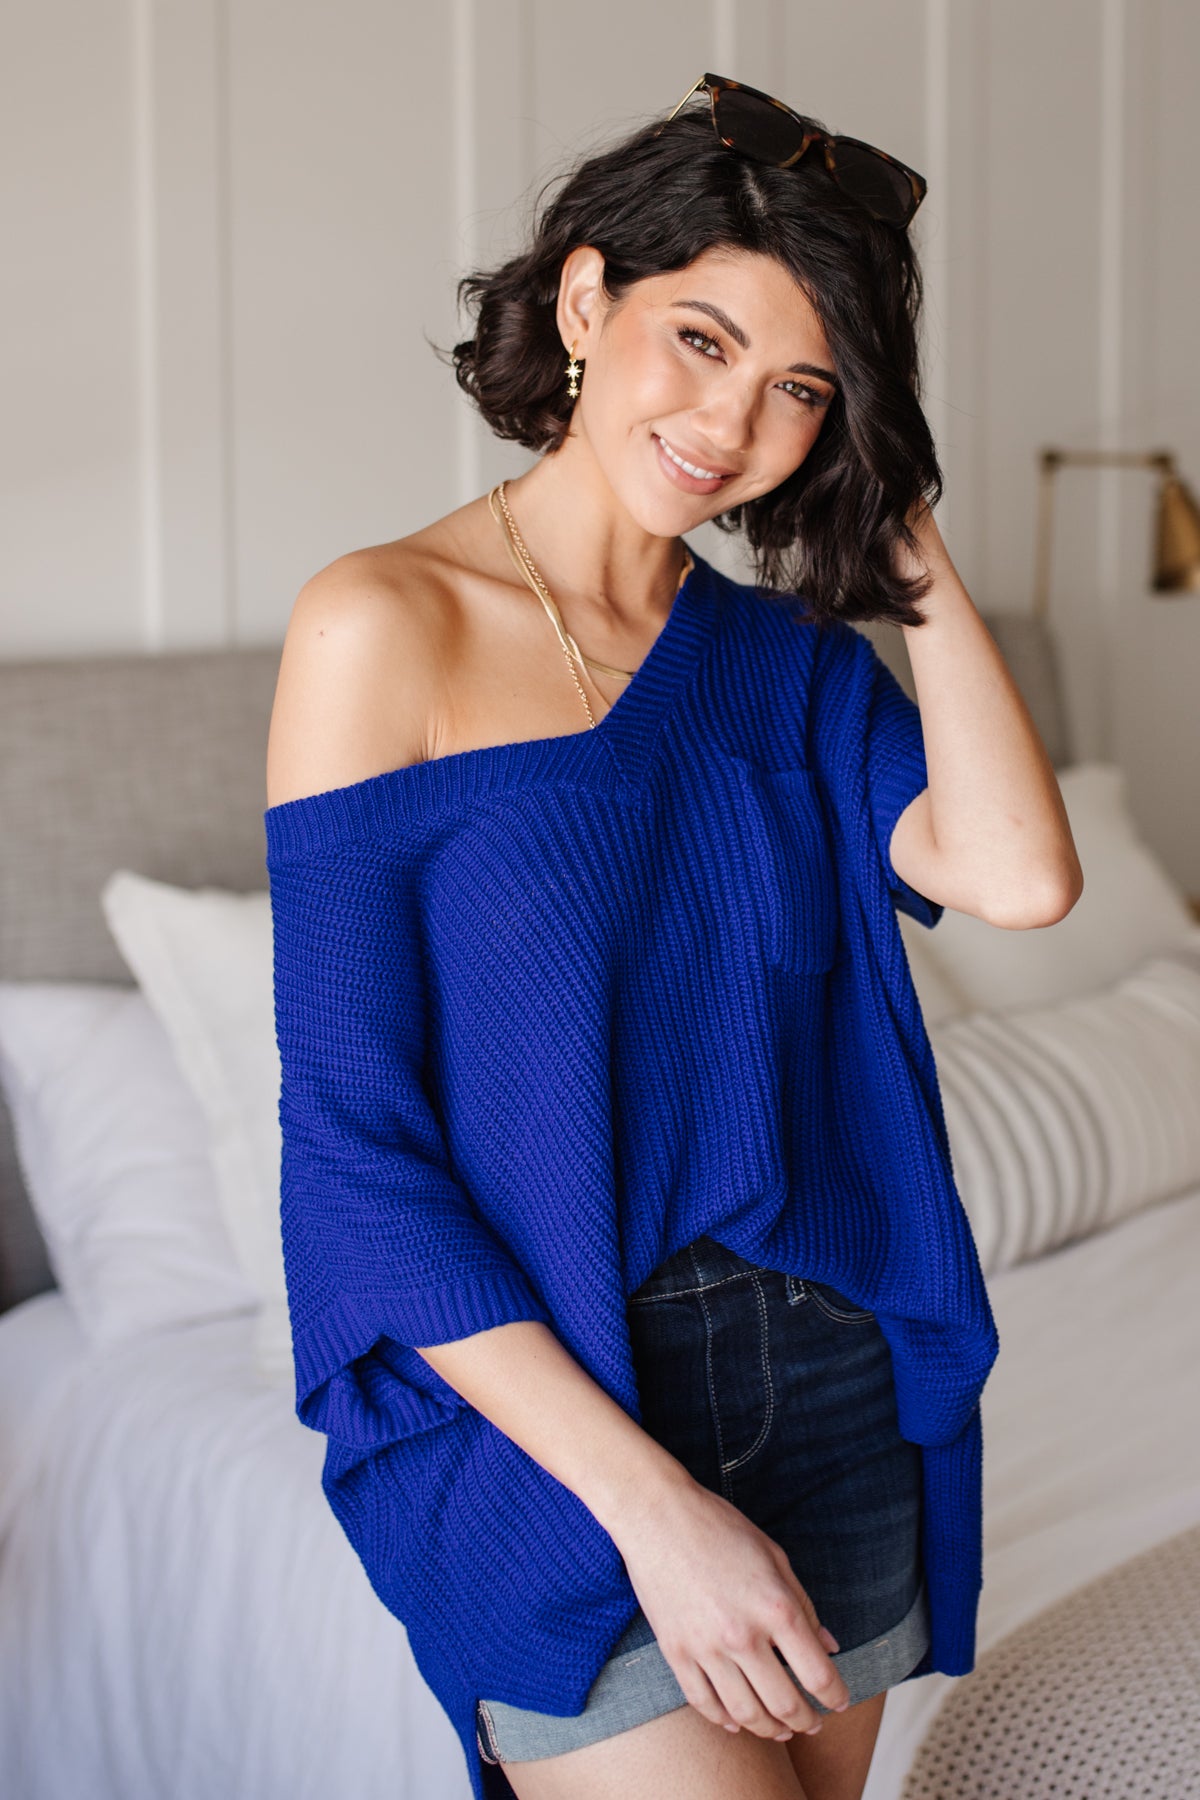 Pure Bliss Knit Top in Royal